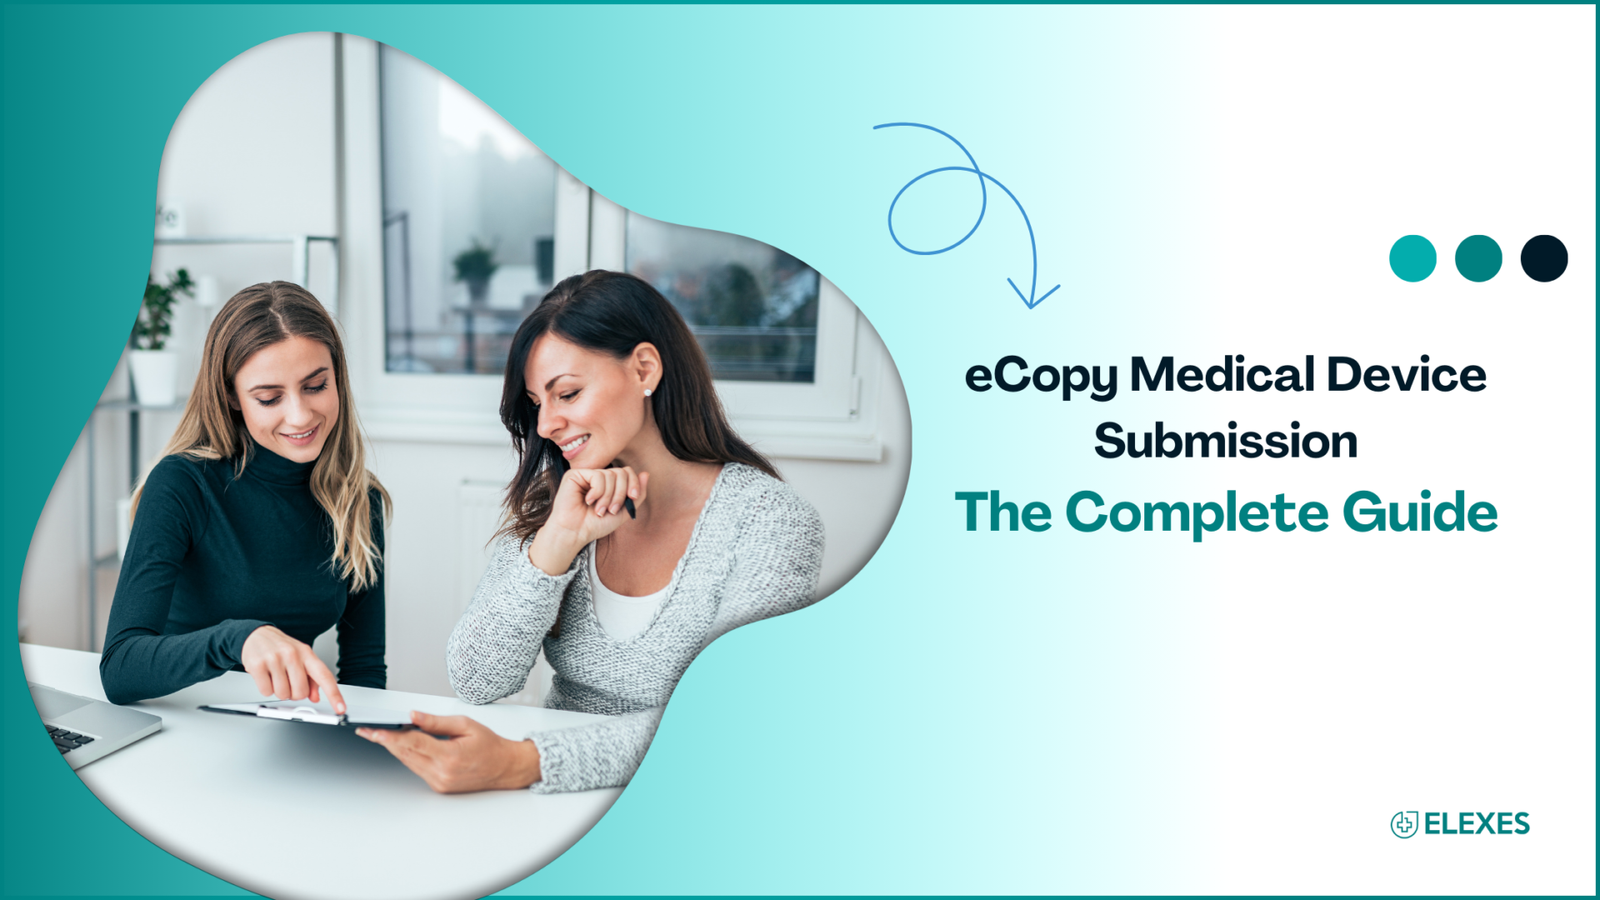 eCopy Medical Device Submission (How to create a successful eCopy?)